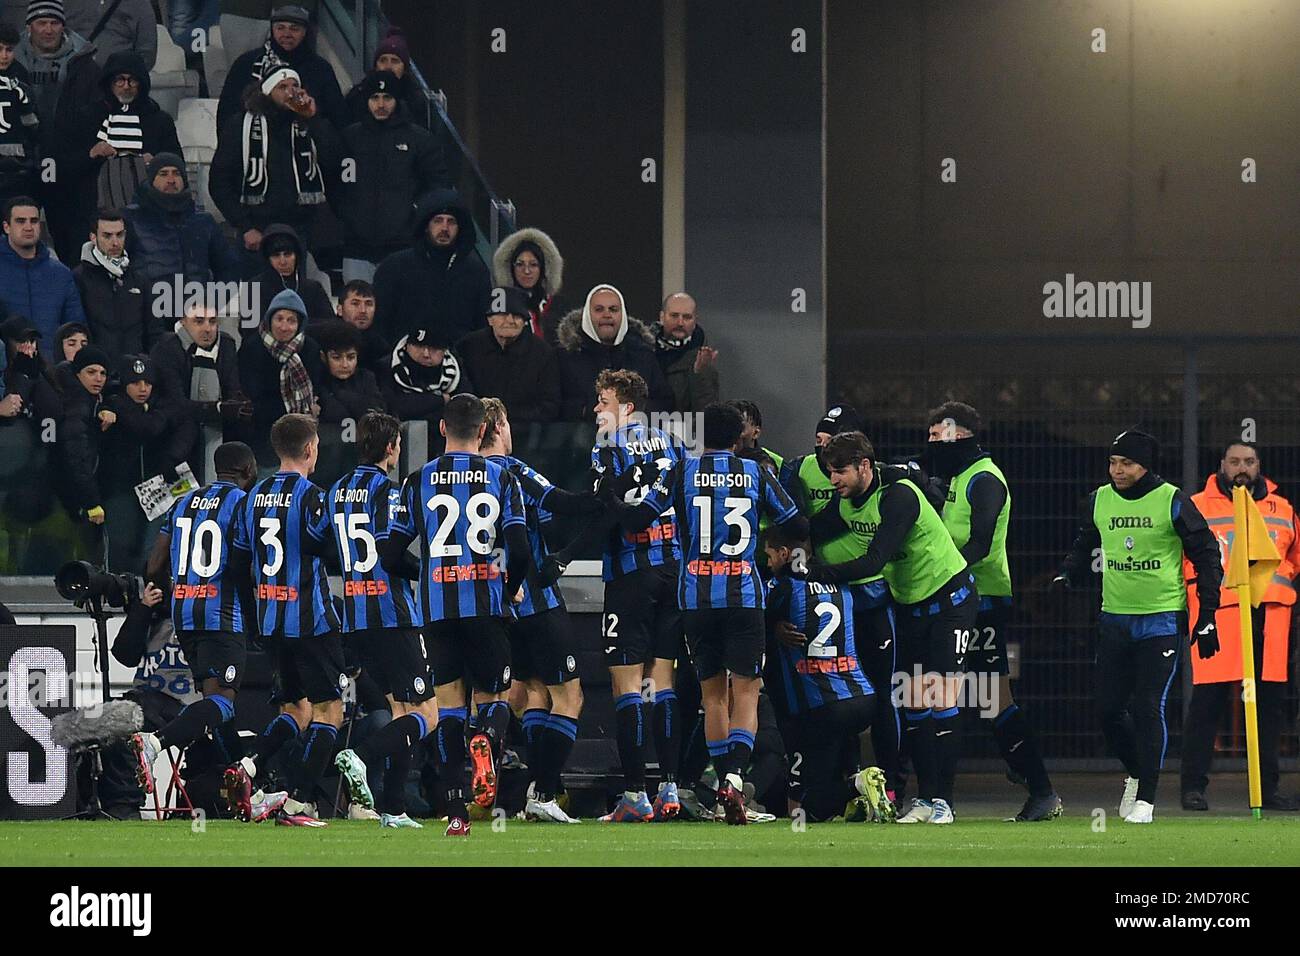 Torino, Italy. 22nd Jan, 2023. Ademola Lookman of Atalanta BC celebrates with team mates after scoring the goal of 2-3 during the Serie A football match between Juventus FC and Atalanta BC at Juventus stadium in Torino (Italy), January 22th, 2022. Photo Giuliano Marchisciano/Insidefoto Credit: Insidefoto di andrea staccioli/Alamy Live News Stock Photo